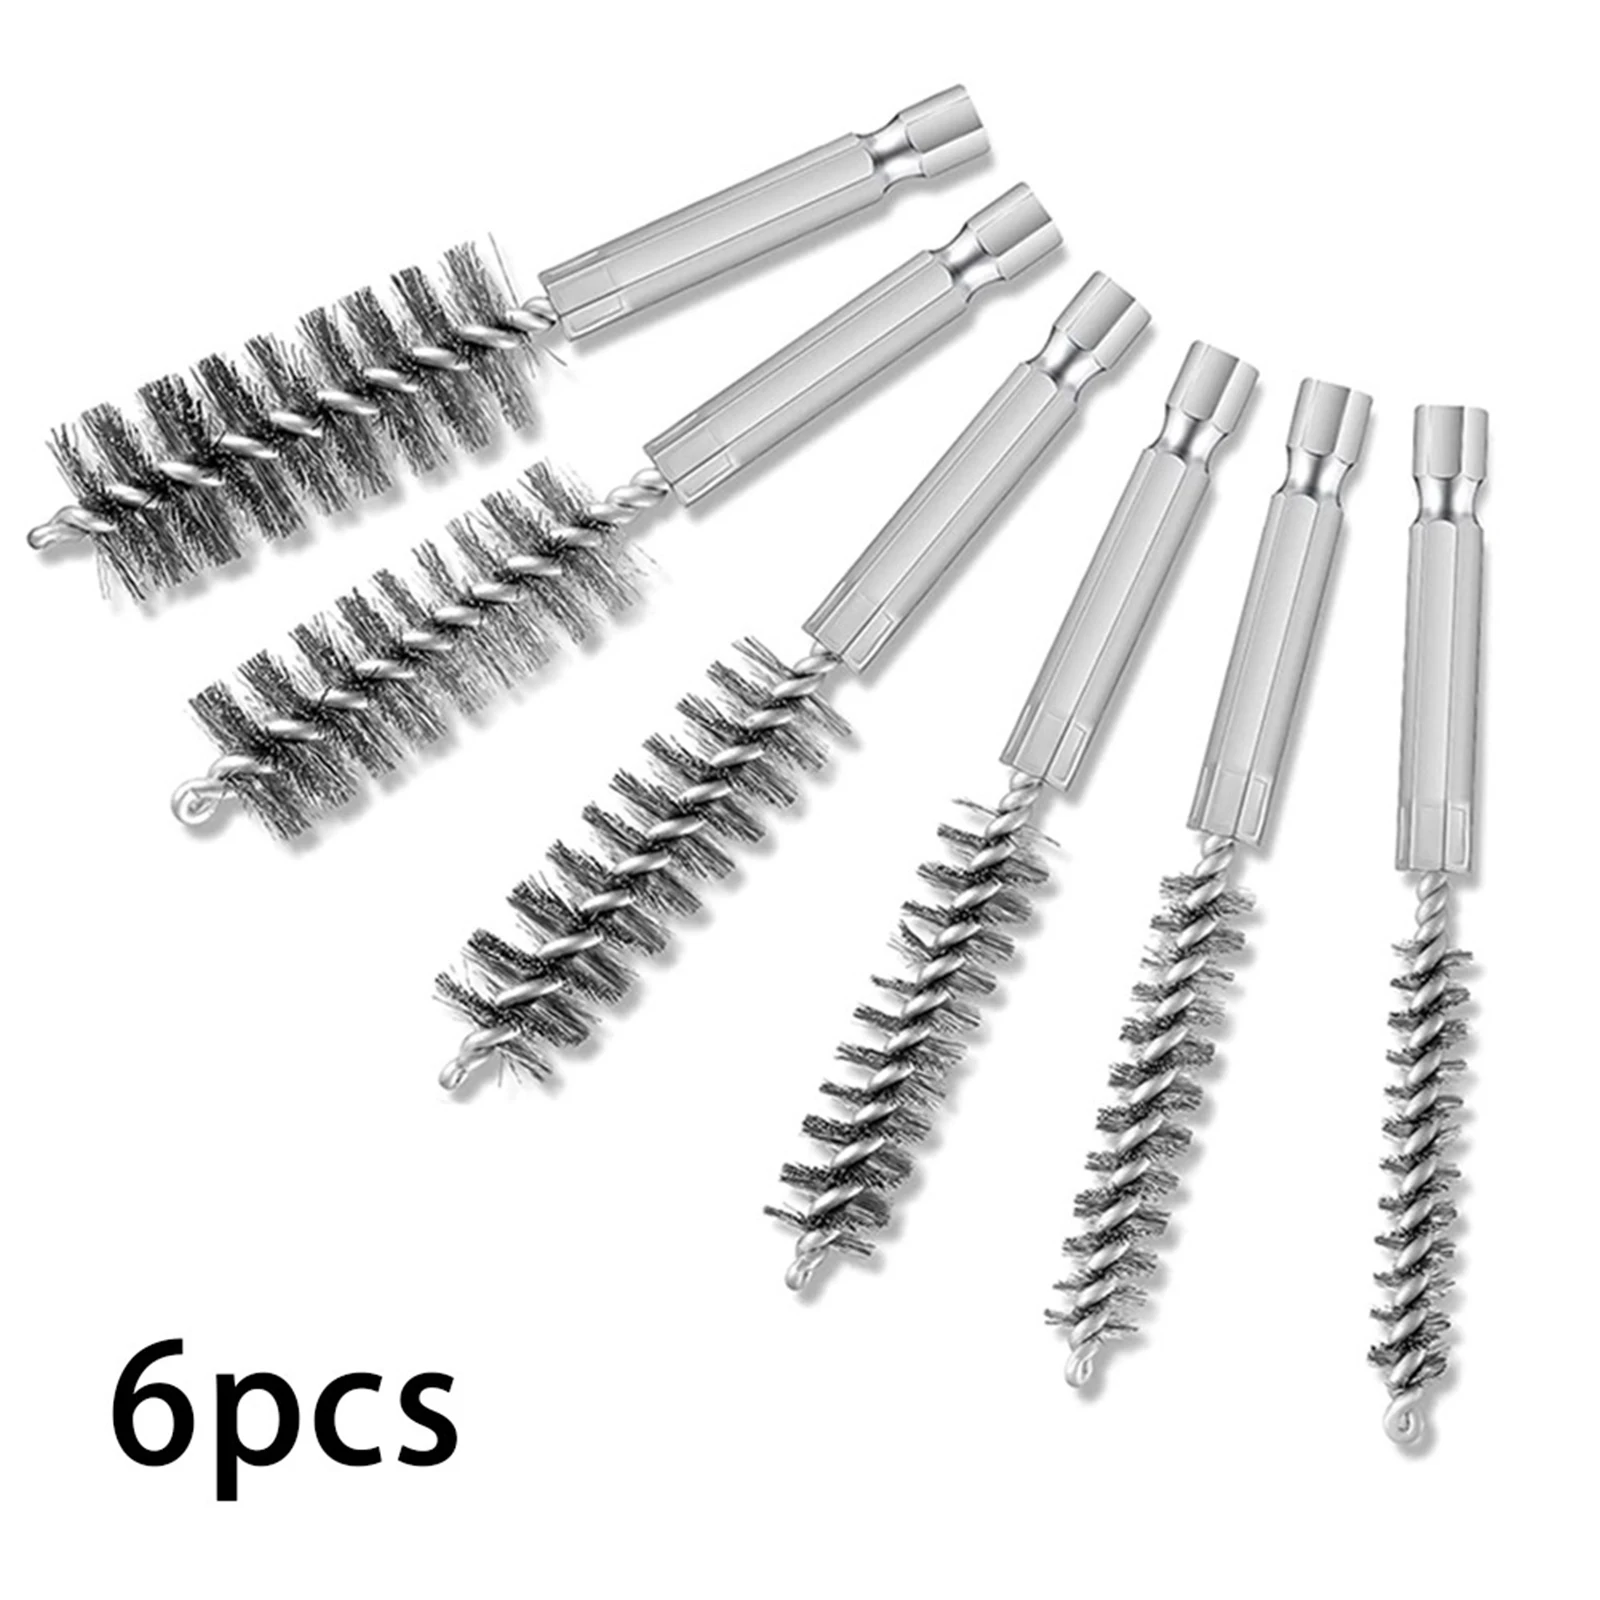 

6 Pcs Drill Brushes Stainless Steel Wire 4'' 1/4'' Hex Shank 9/11/13/16/18/19mm For Power Impact Drill Car Cleaning Accessories